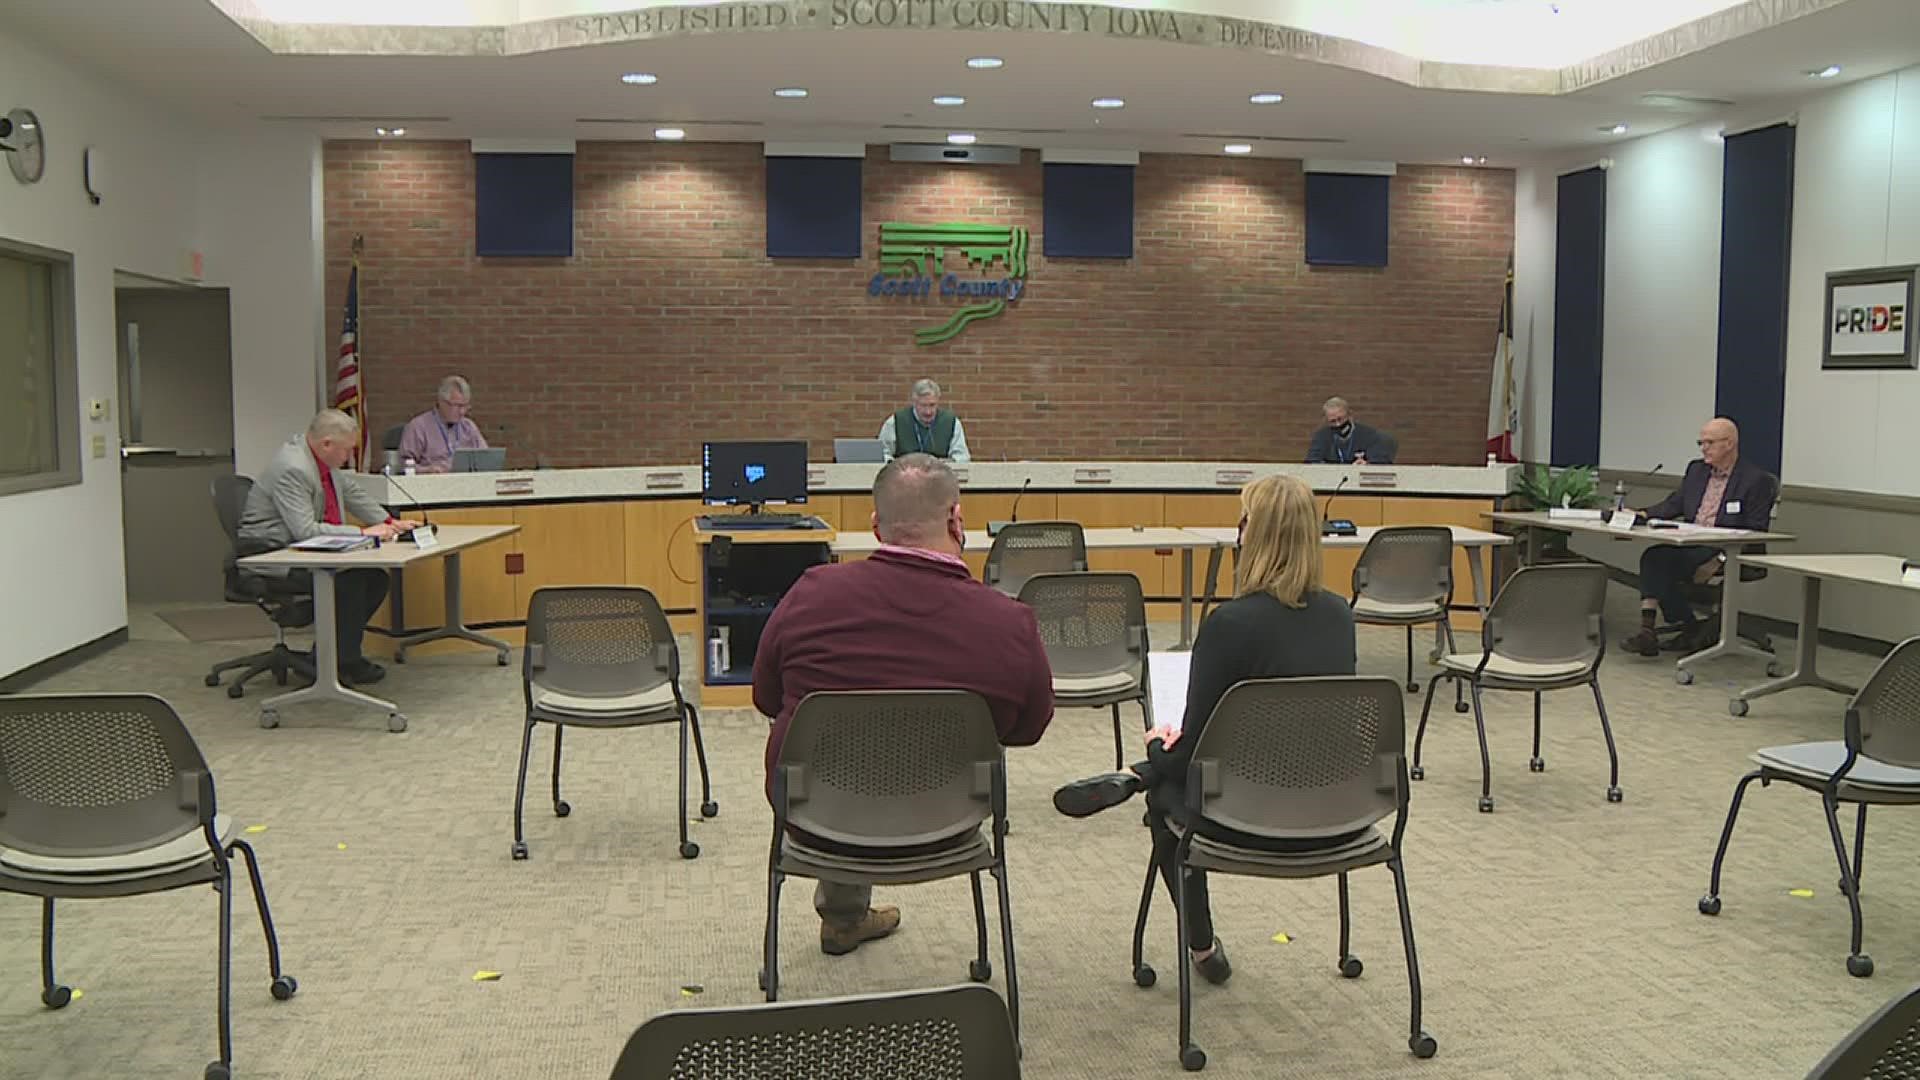 Scott County Board of Supervisors met for the first time after a unanimous vote by the city of Davenport against building a new facility in the downtown area.